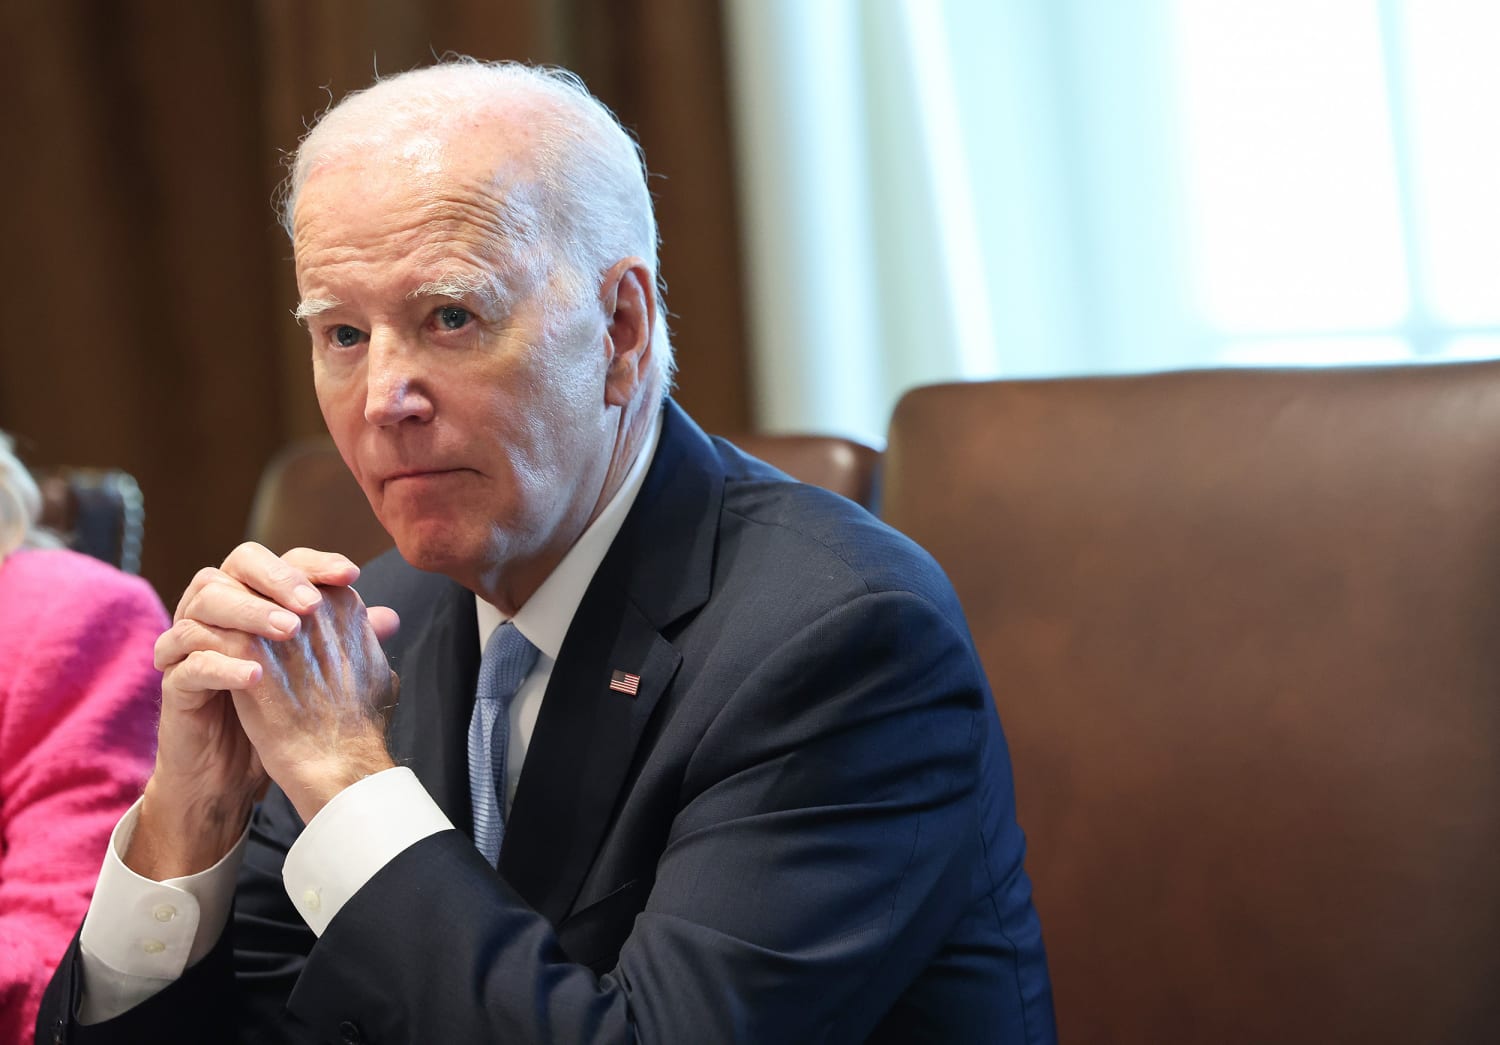 Biden addresses impeachment for the first time after Kevin McCarthy announces inquiry